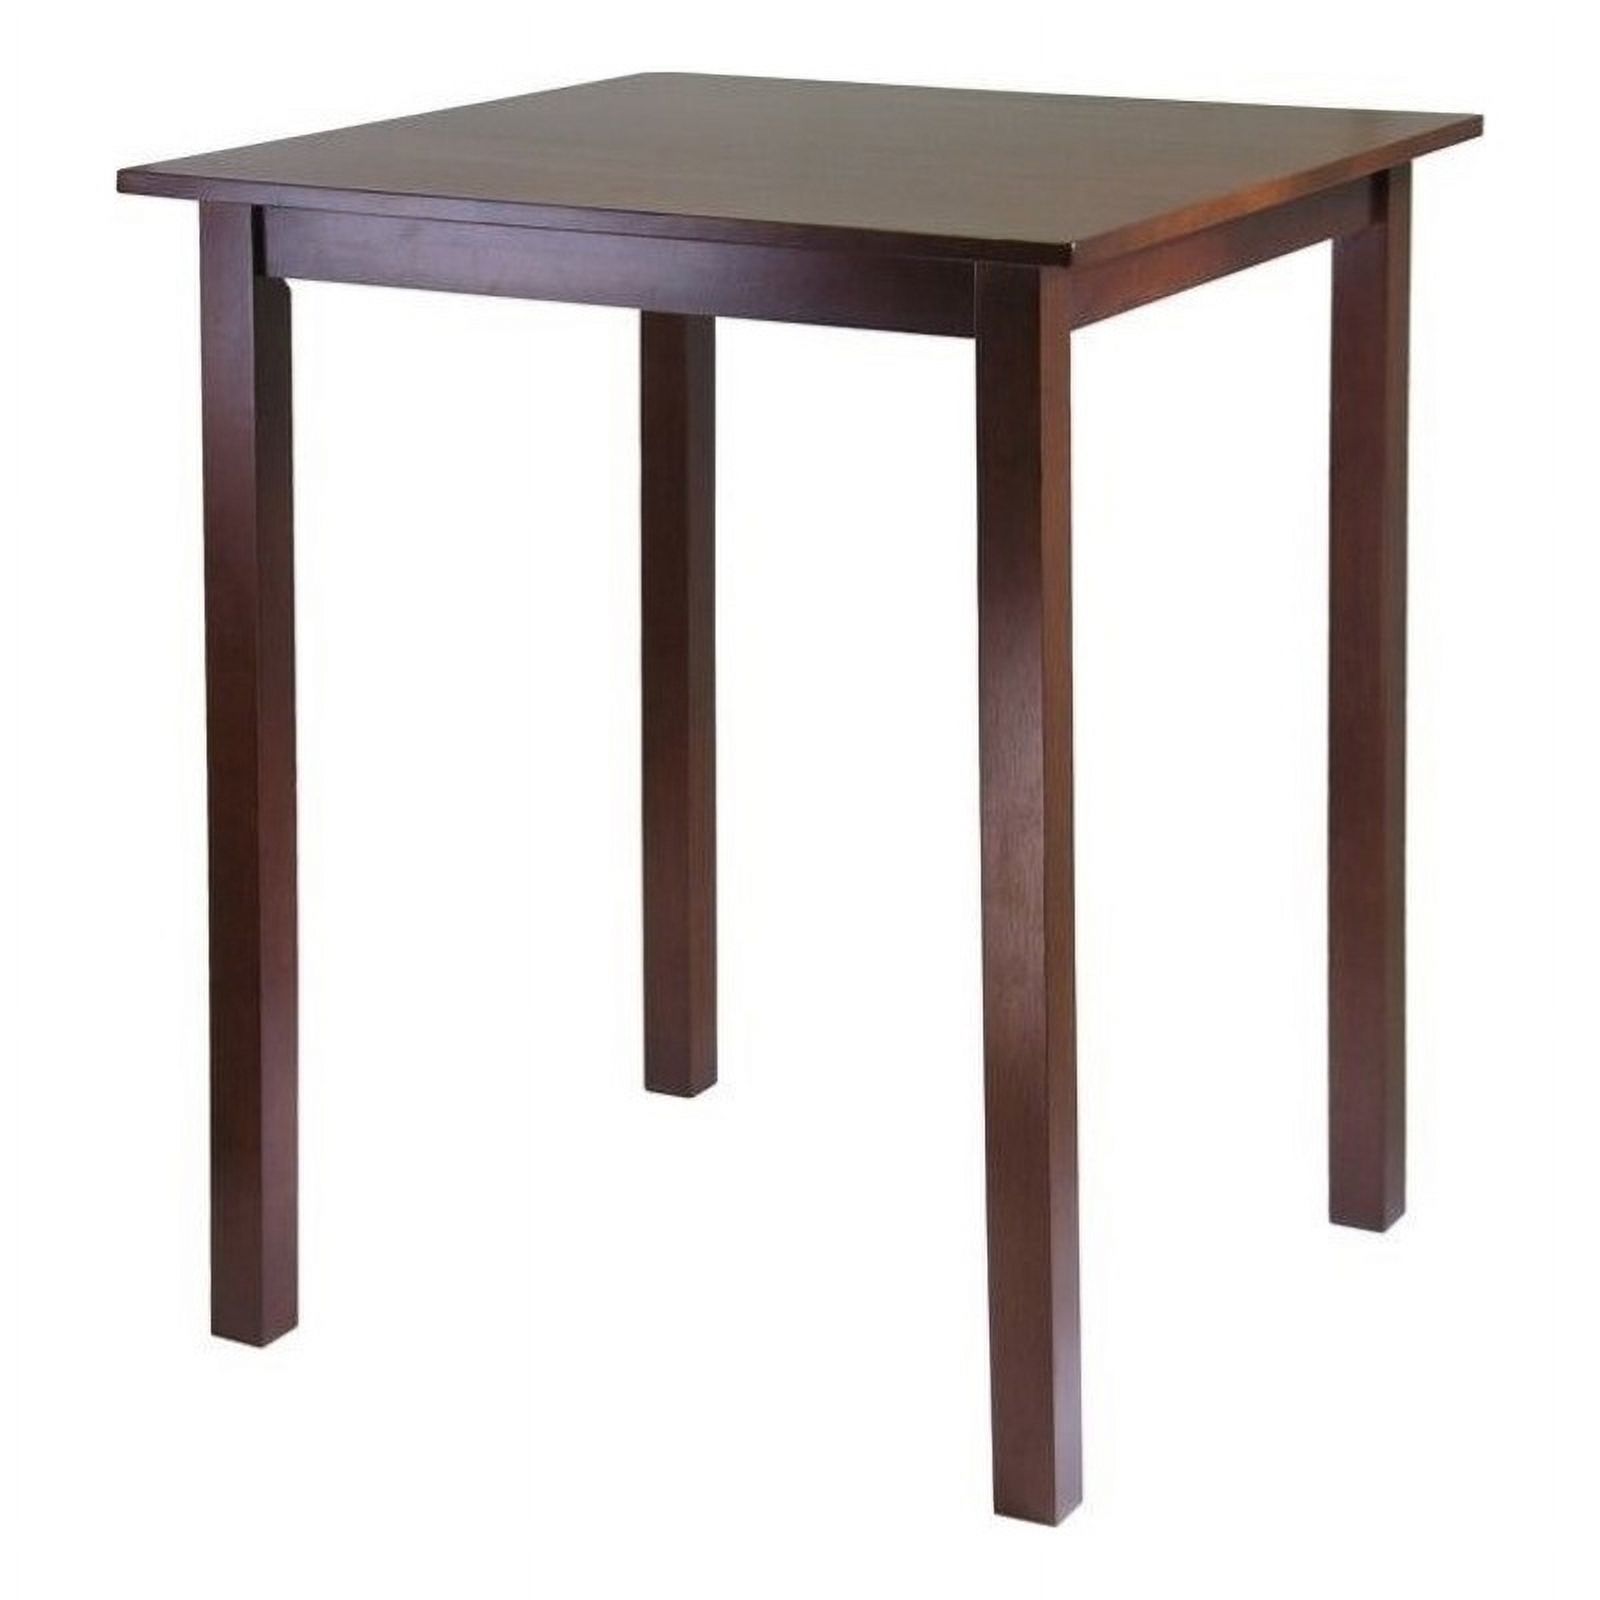 Winsome Wood Parkland Square High Table, Walnut Finish - image 1 of 5